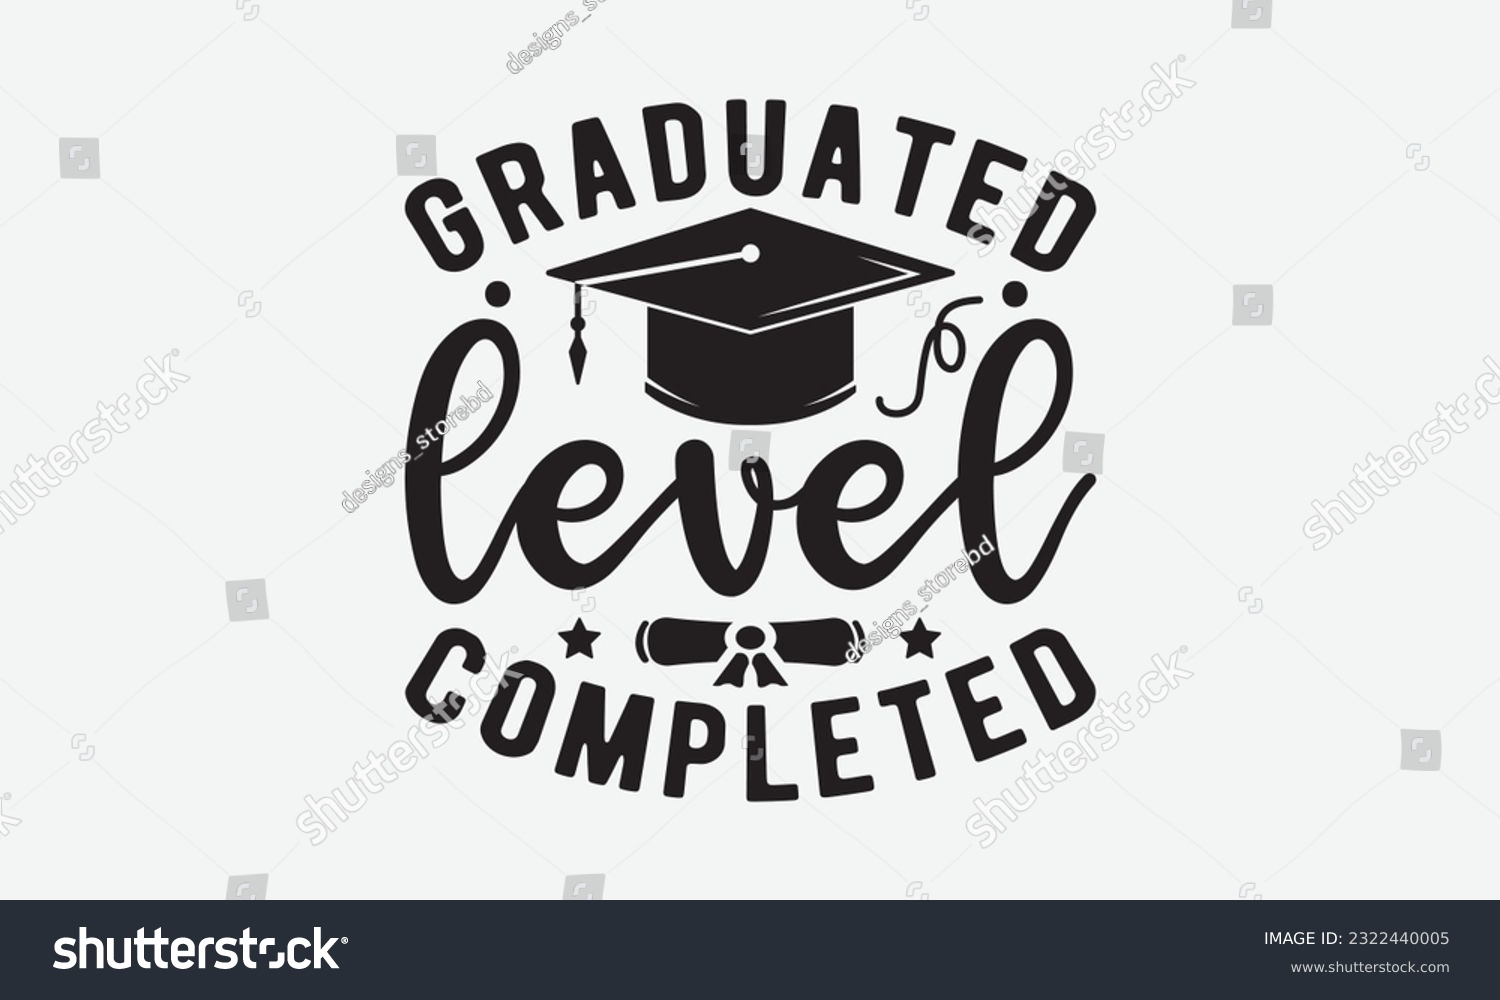 SVG of Graduated level completed svg, Graduation SVG , Class of 2023 Graduation SVG Bundle, Graduation cap svg, T shirt Calligraphy phrase for Christmas, Hand drawn lettering for Xmas greetings cards, invita svg